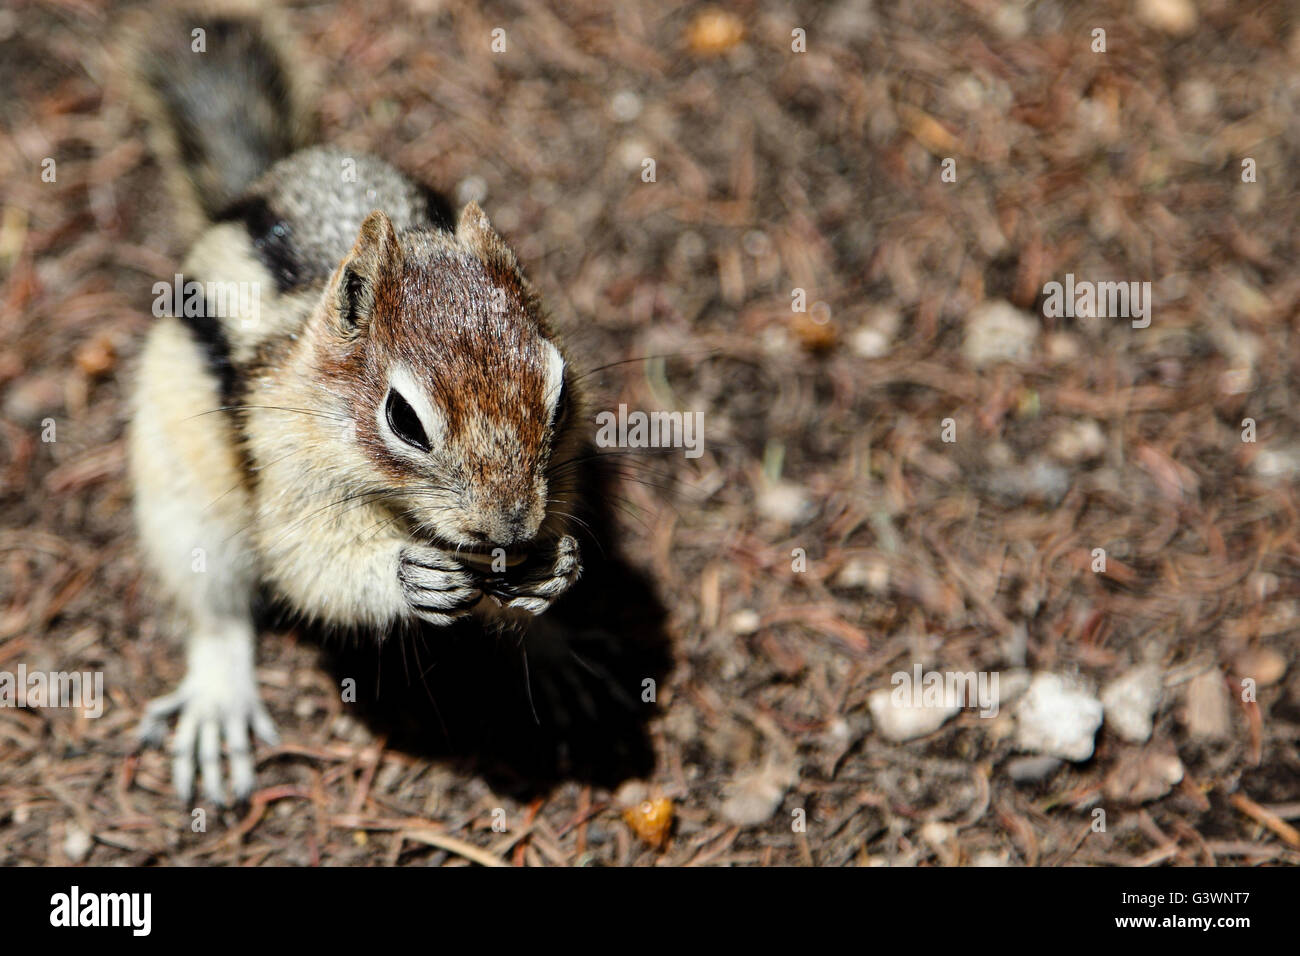 A wild chipmunk (Tamias Striatus) stands on its hind legs looking for food. Stock Photo